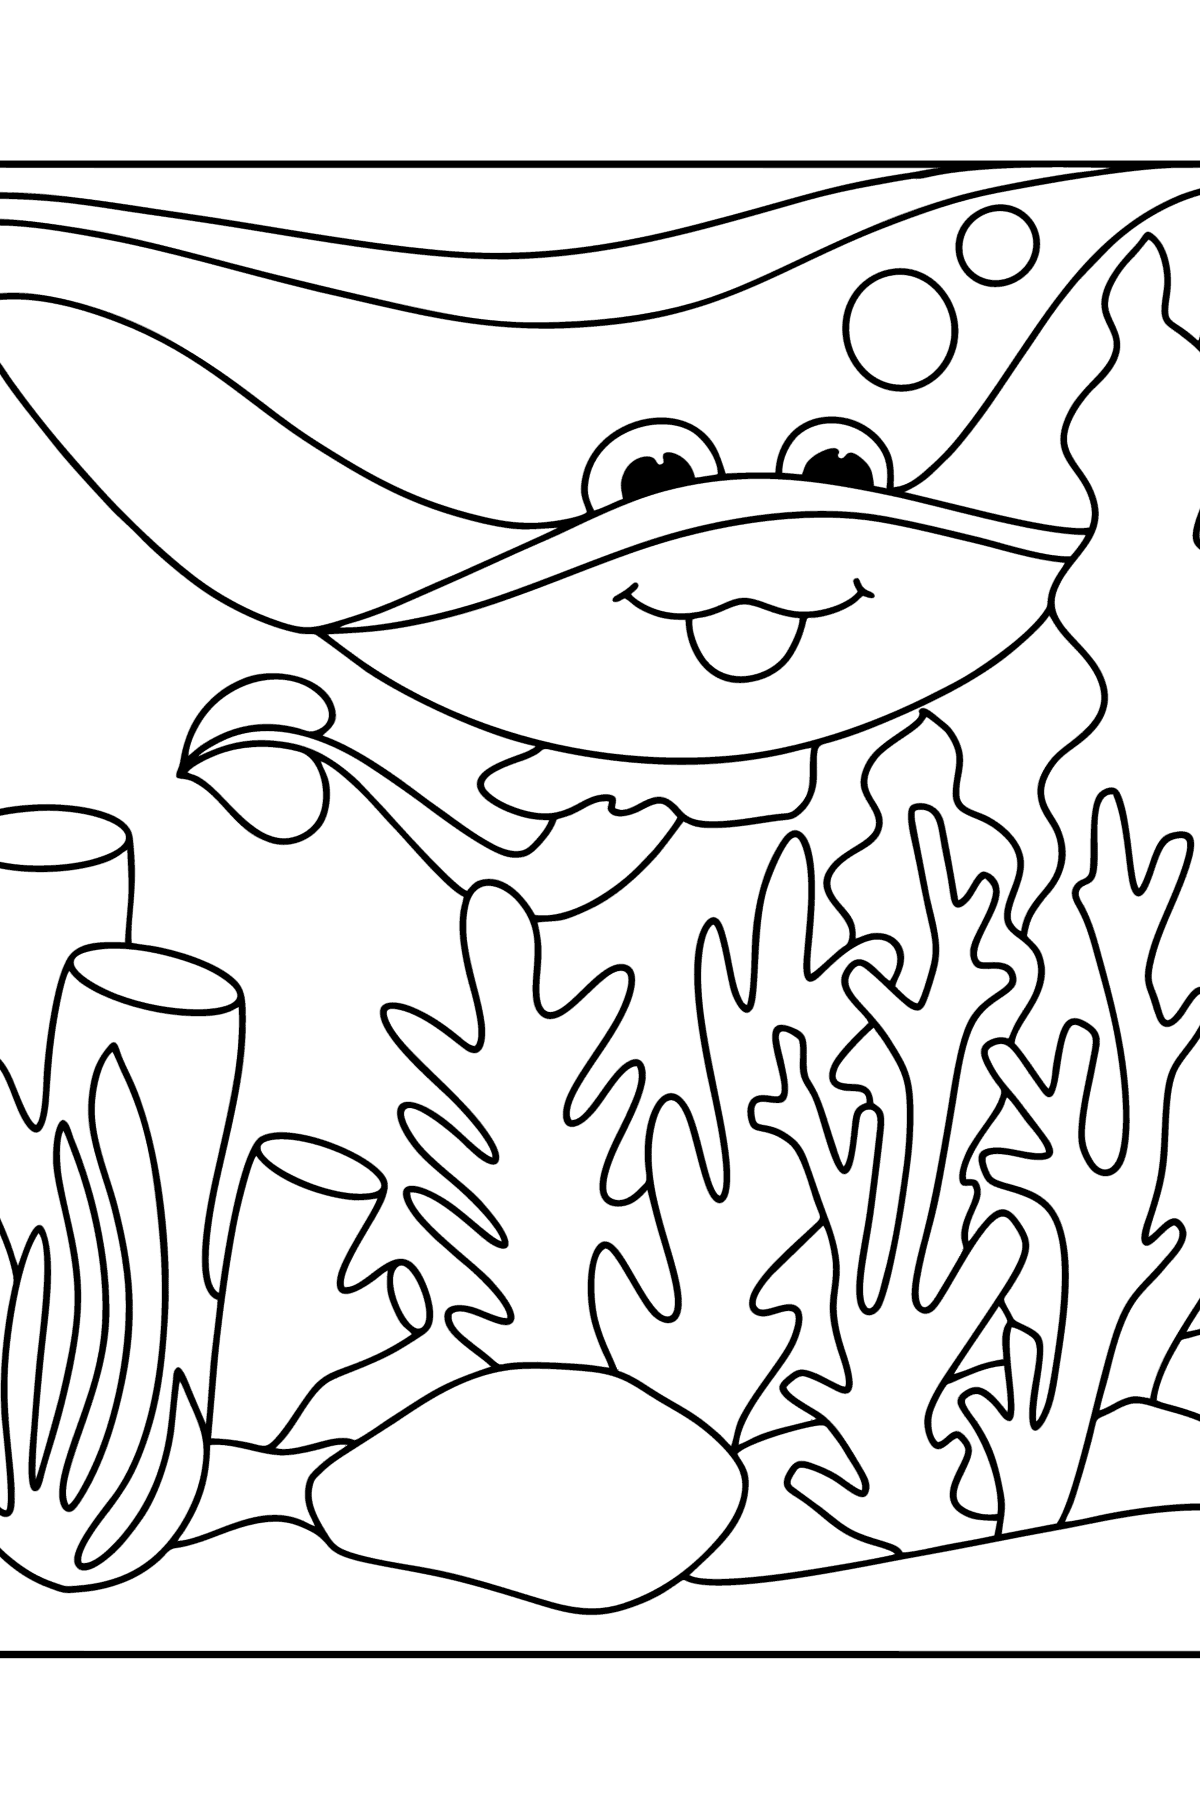 Stingray coloring page - Coloring Pages for Kids